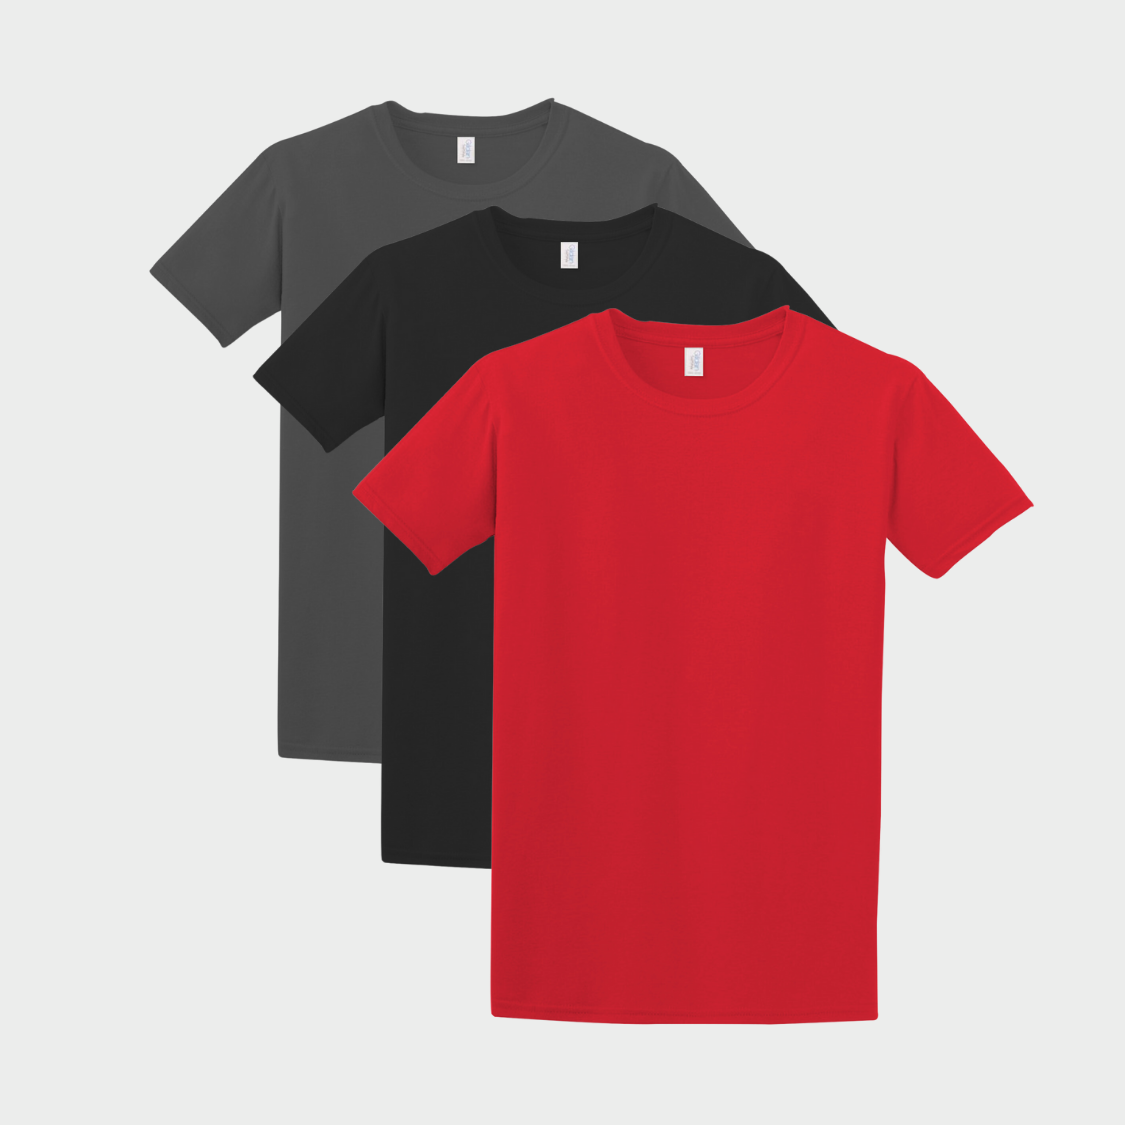 Pack of 3 solid t-shirts (Heather, Black, Red) Size M